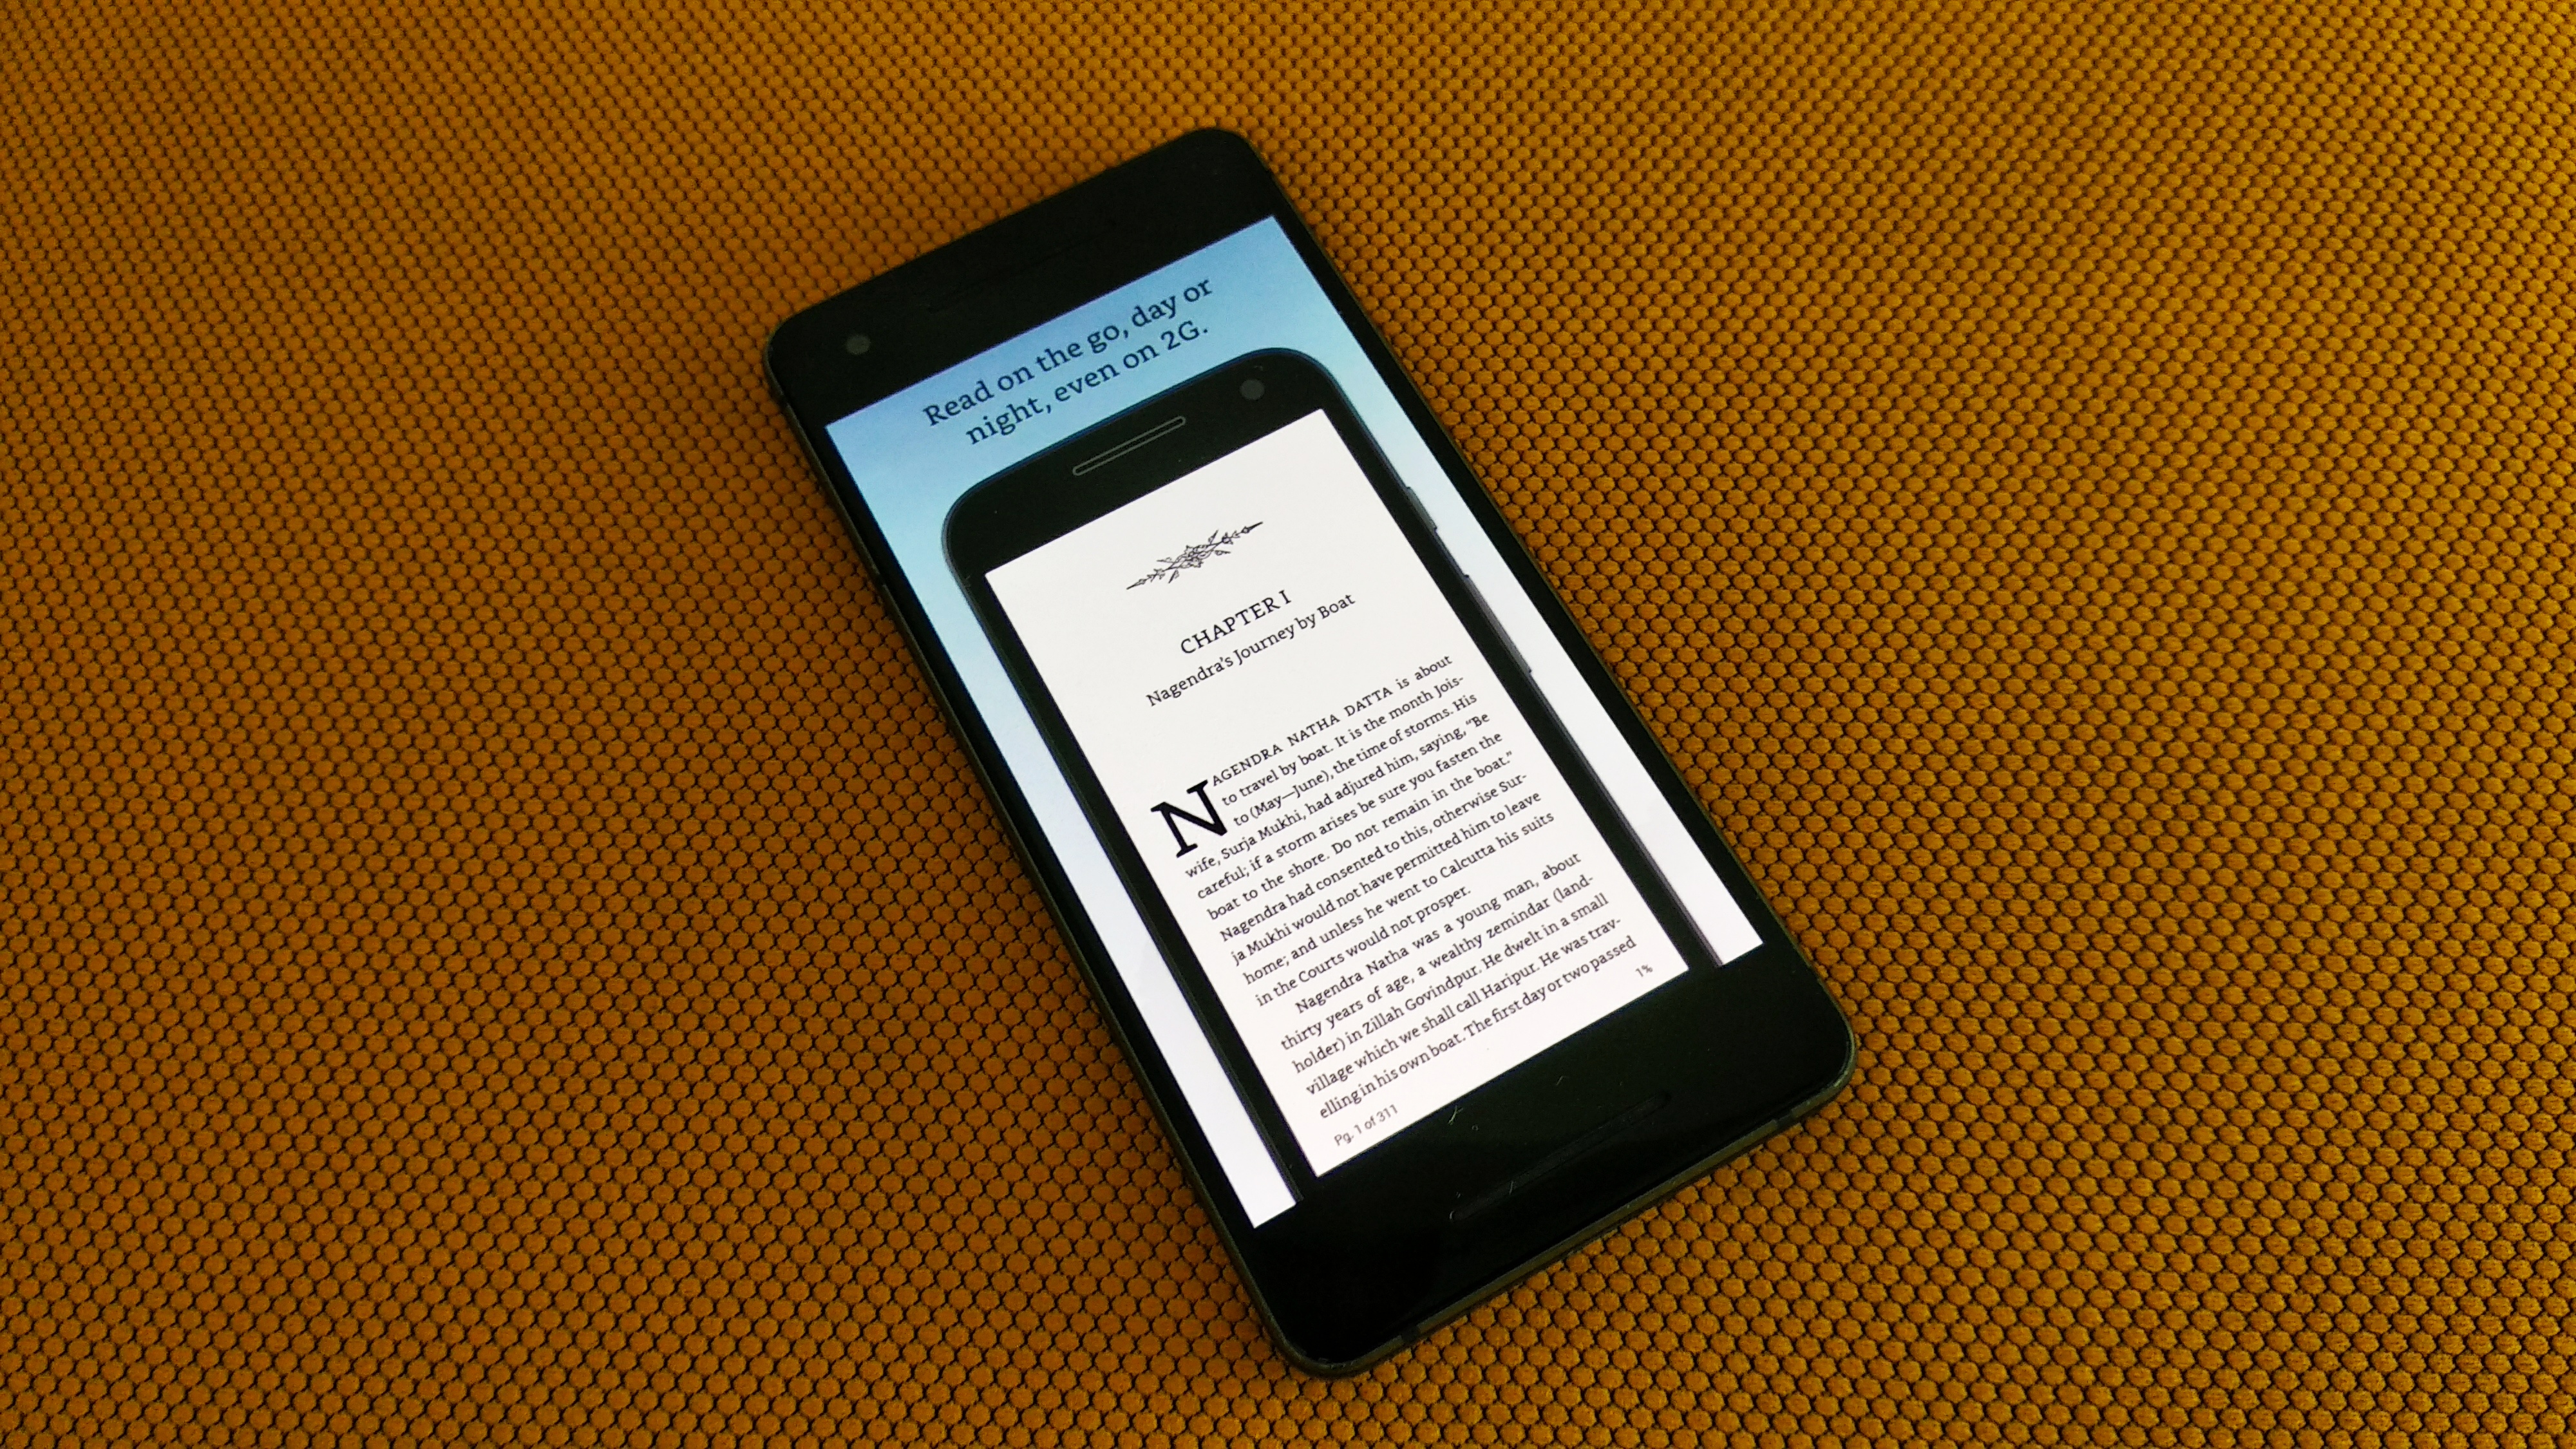 kindle app sync with kindle device